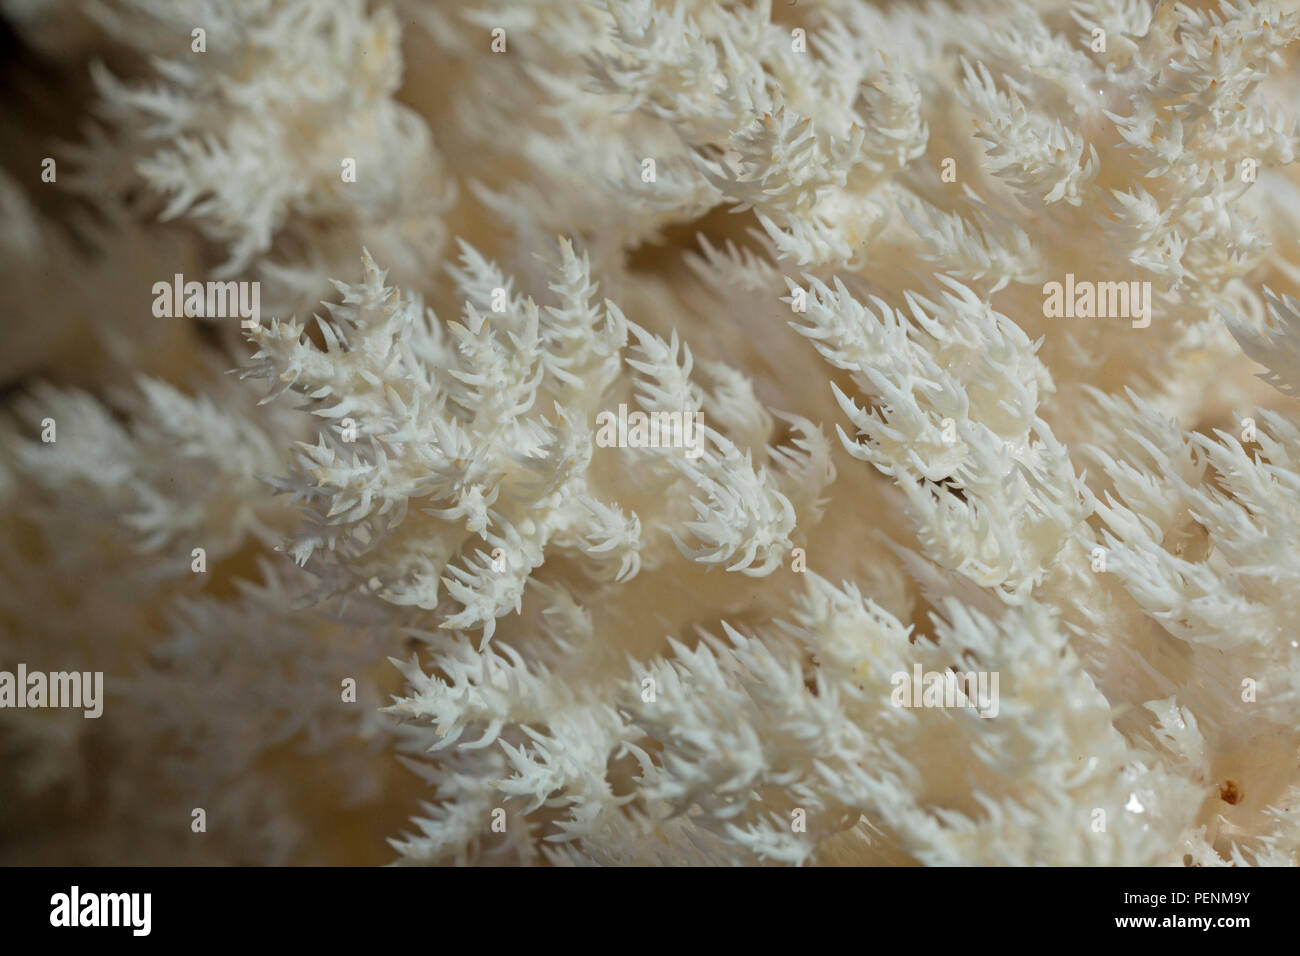 Coral Tooth Fungus, (Hericium coralloides) Stock Photo